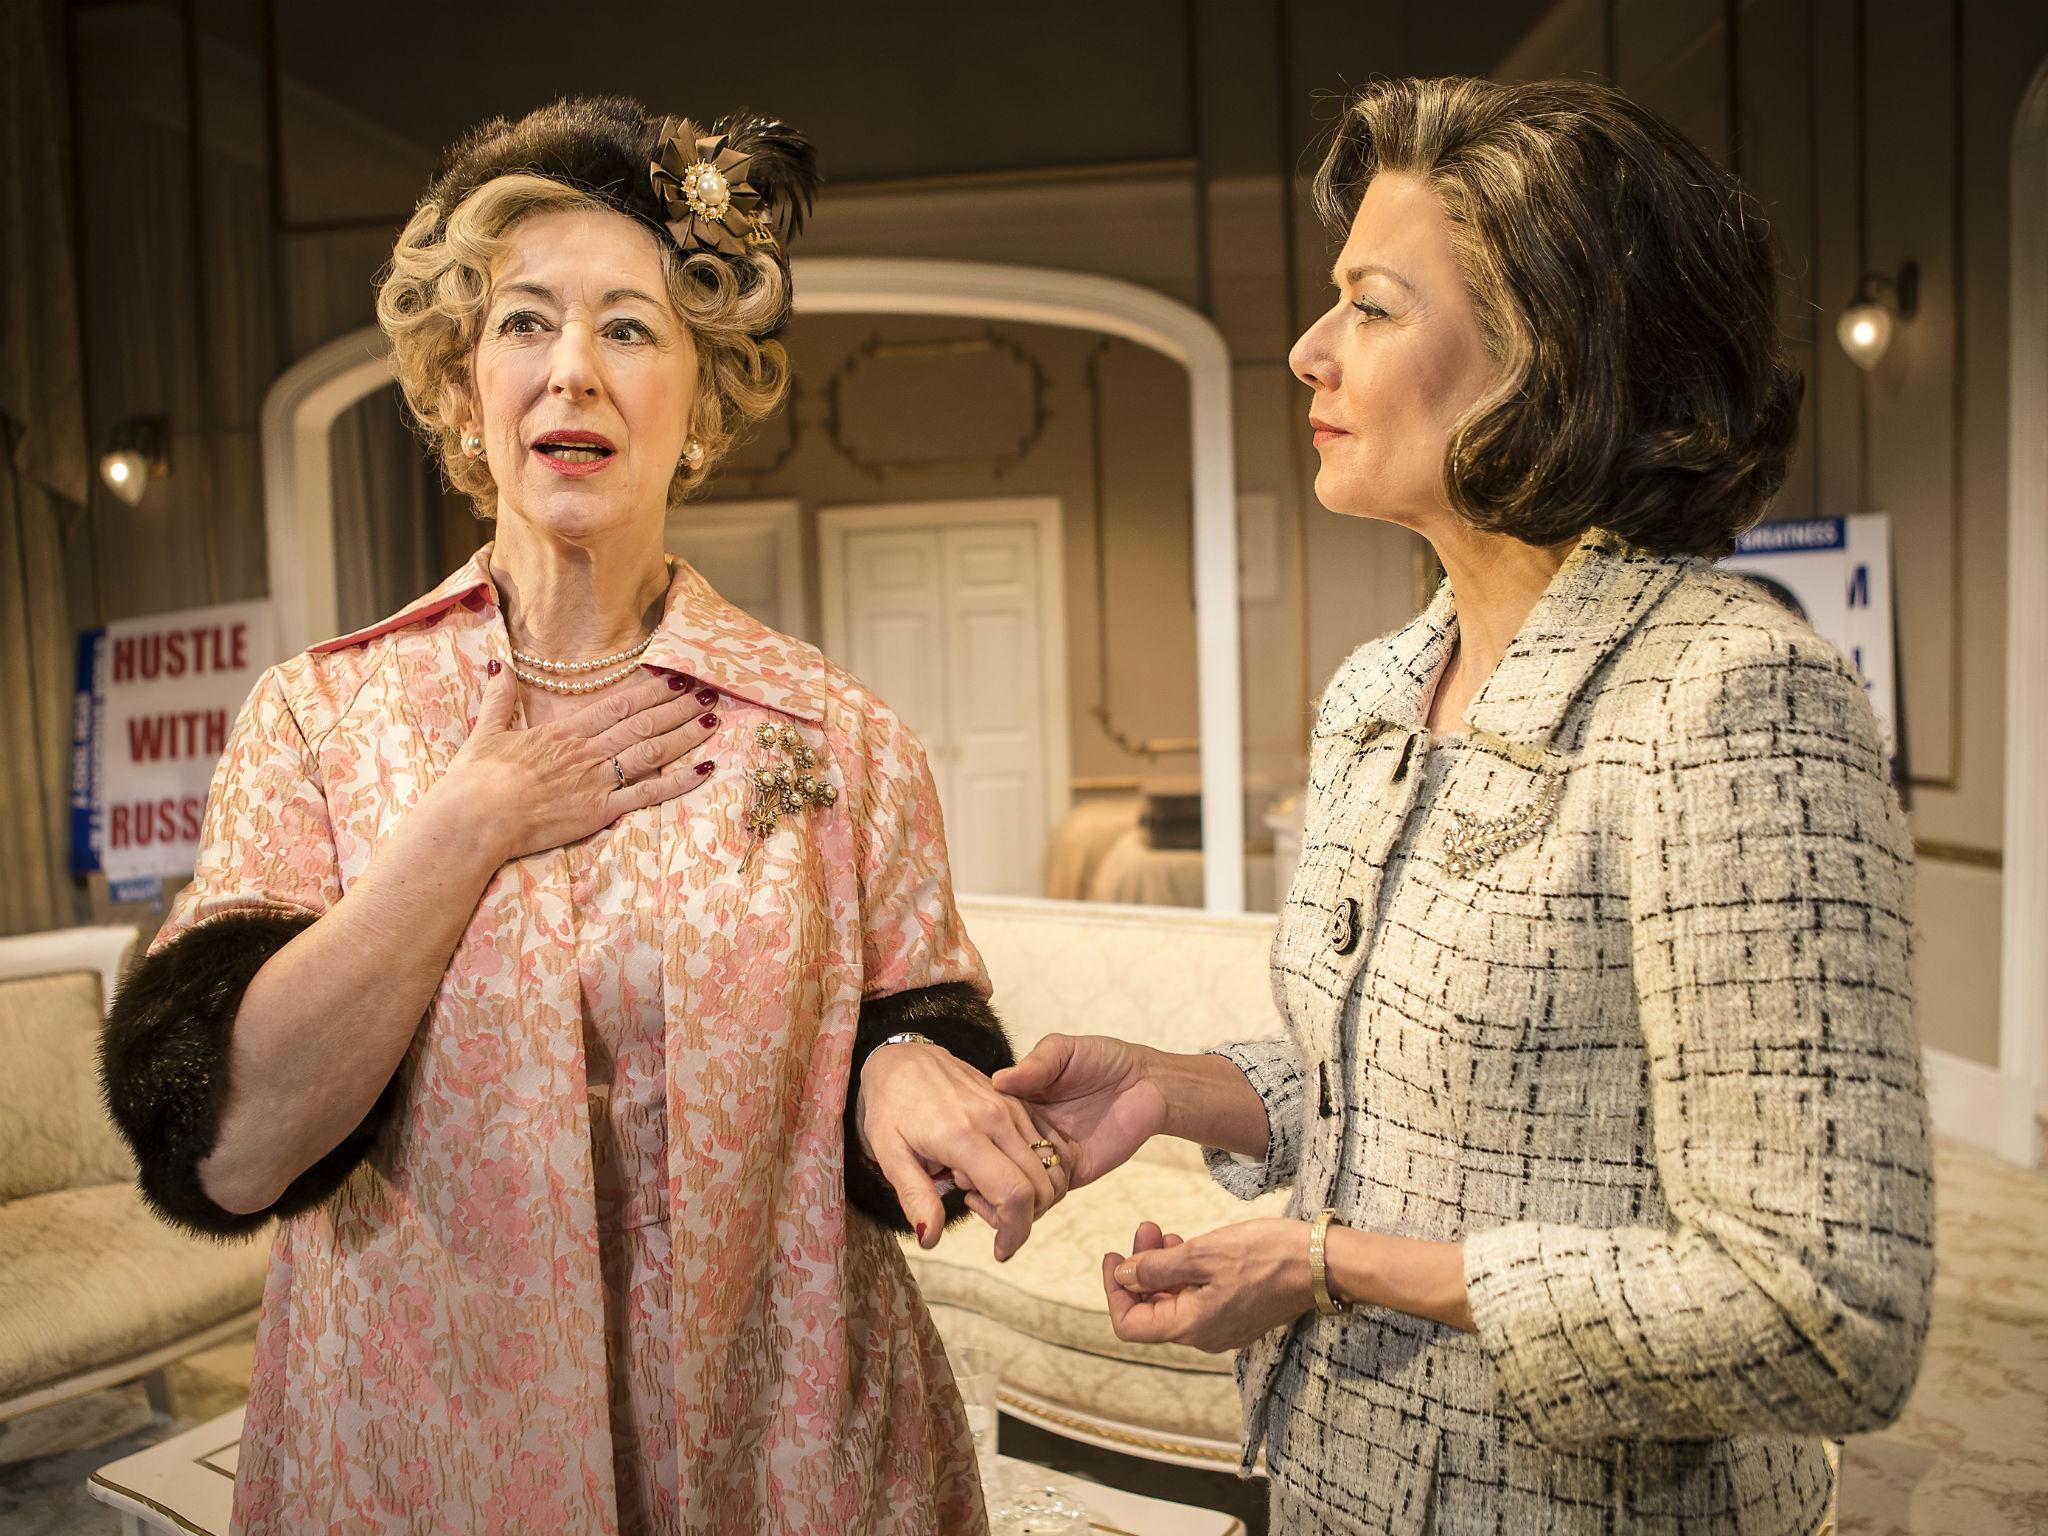 Maureen Lipman as Mrs Gamadge and Glynis Barber as Alice Russell in ‘The Best Man’ at Playhouse Theatre